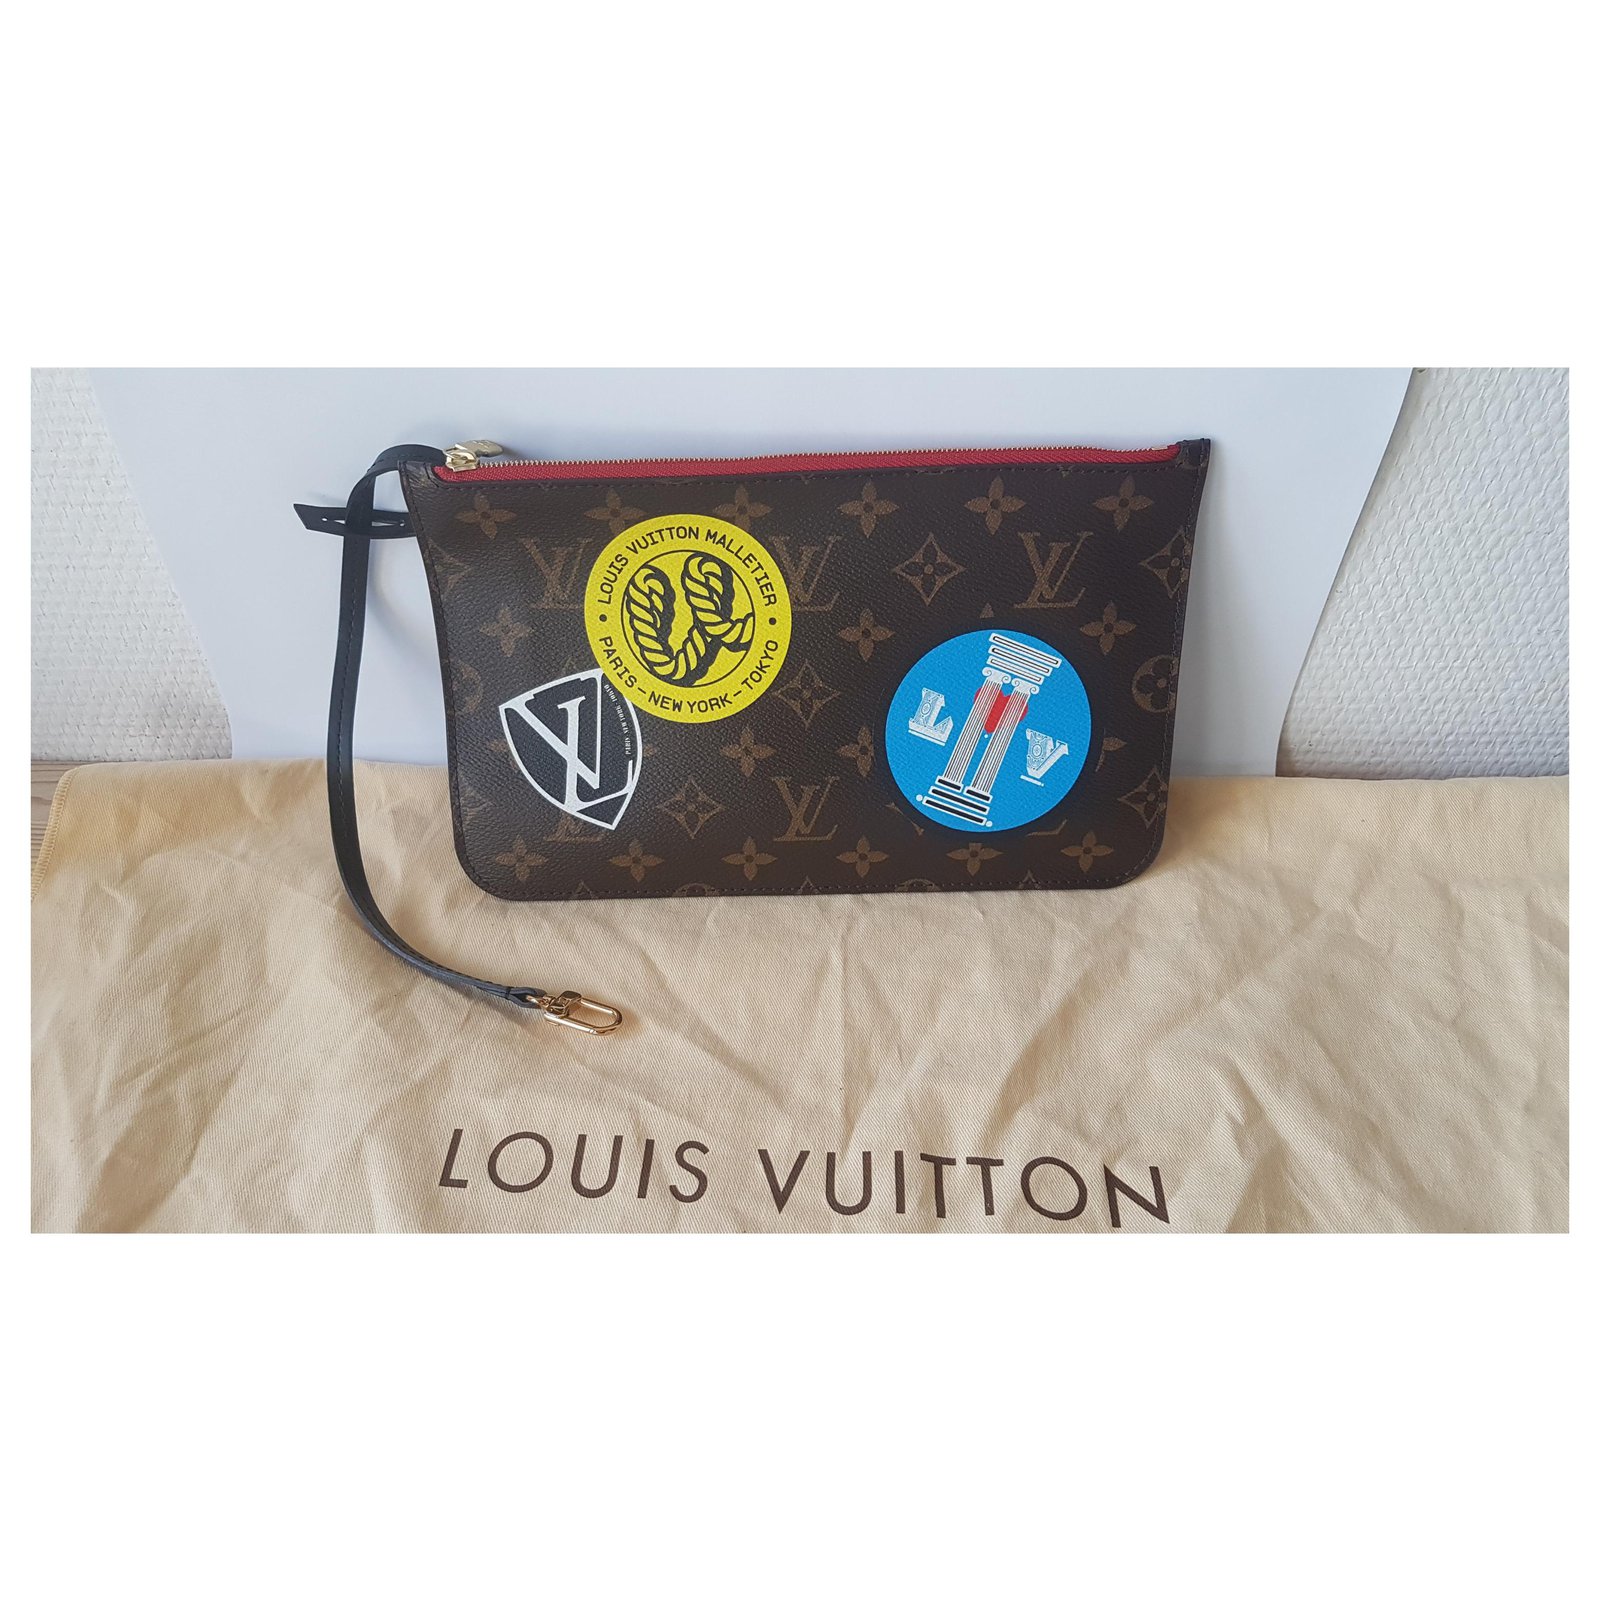 LOUIS VUITTON Neverfull World Tour limited edition bag Multiple